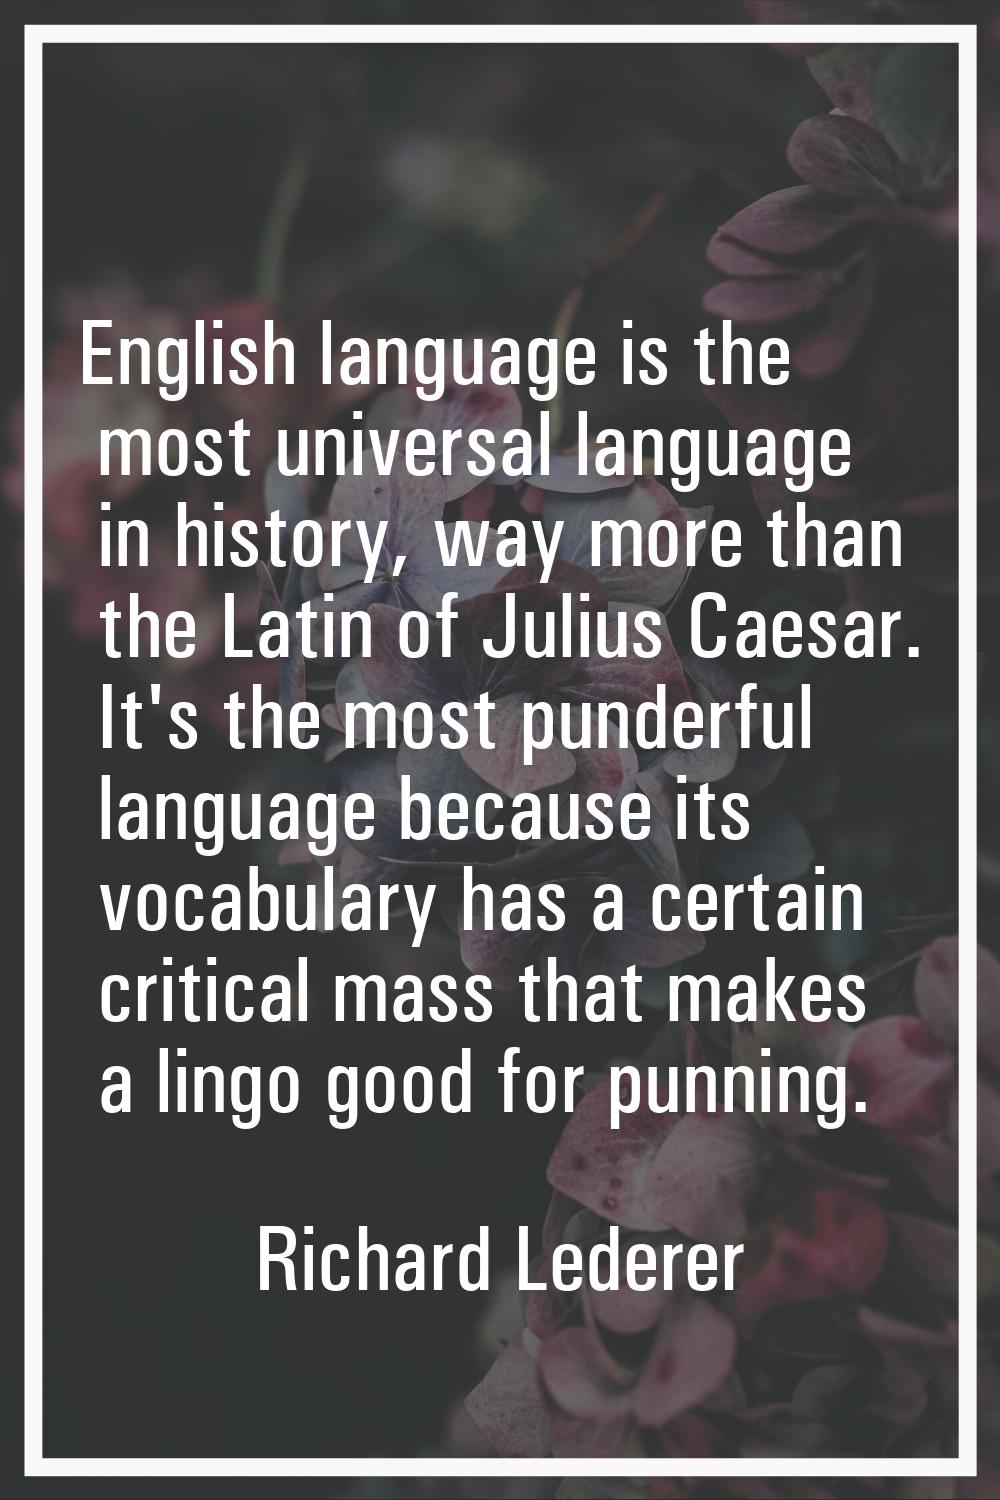 English language is the most universal language in history, way more than the Latin of Julius Caesa